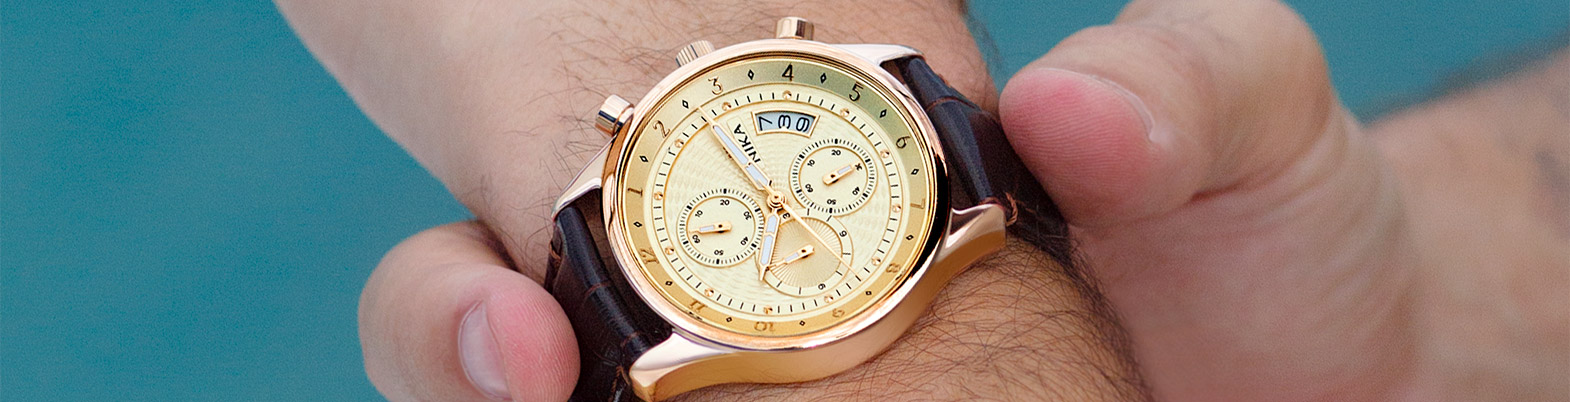 Chronograph watches: what are they?